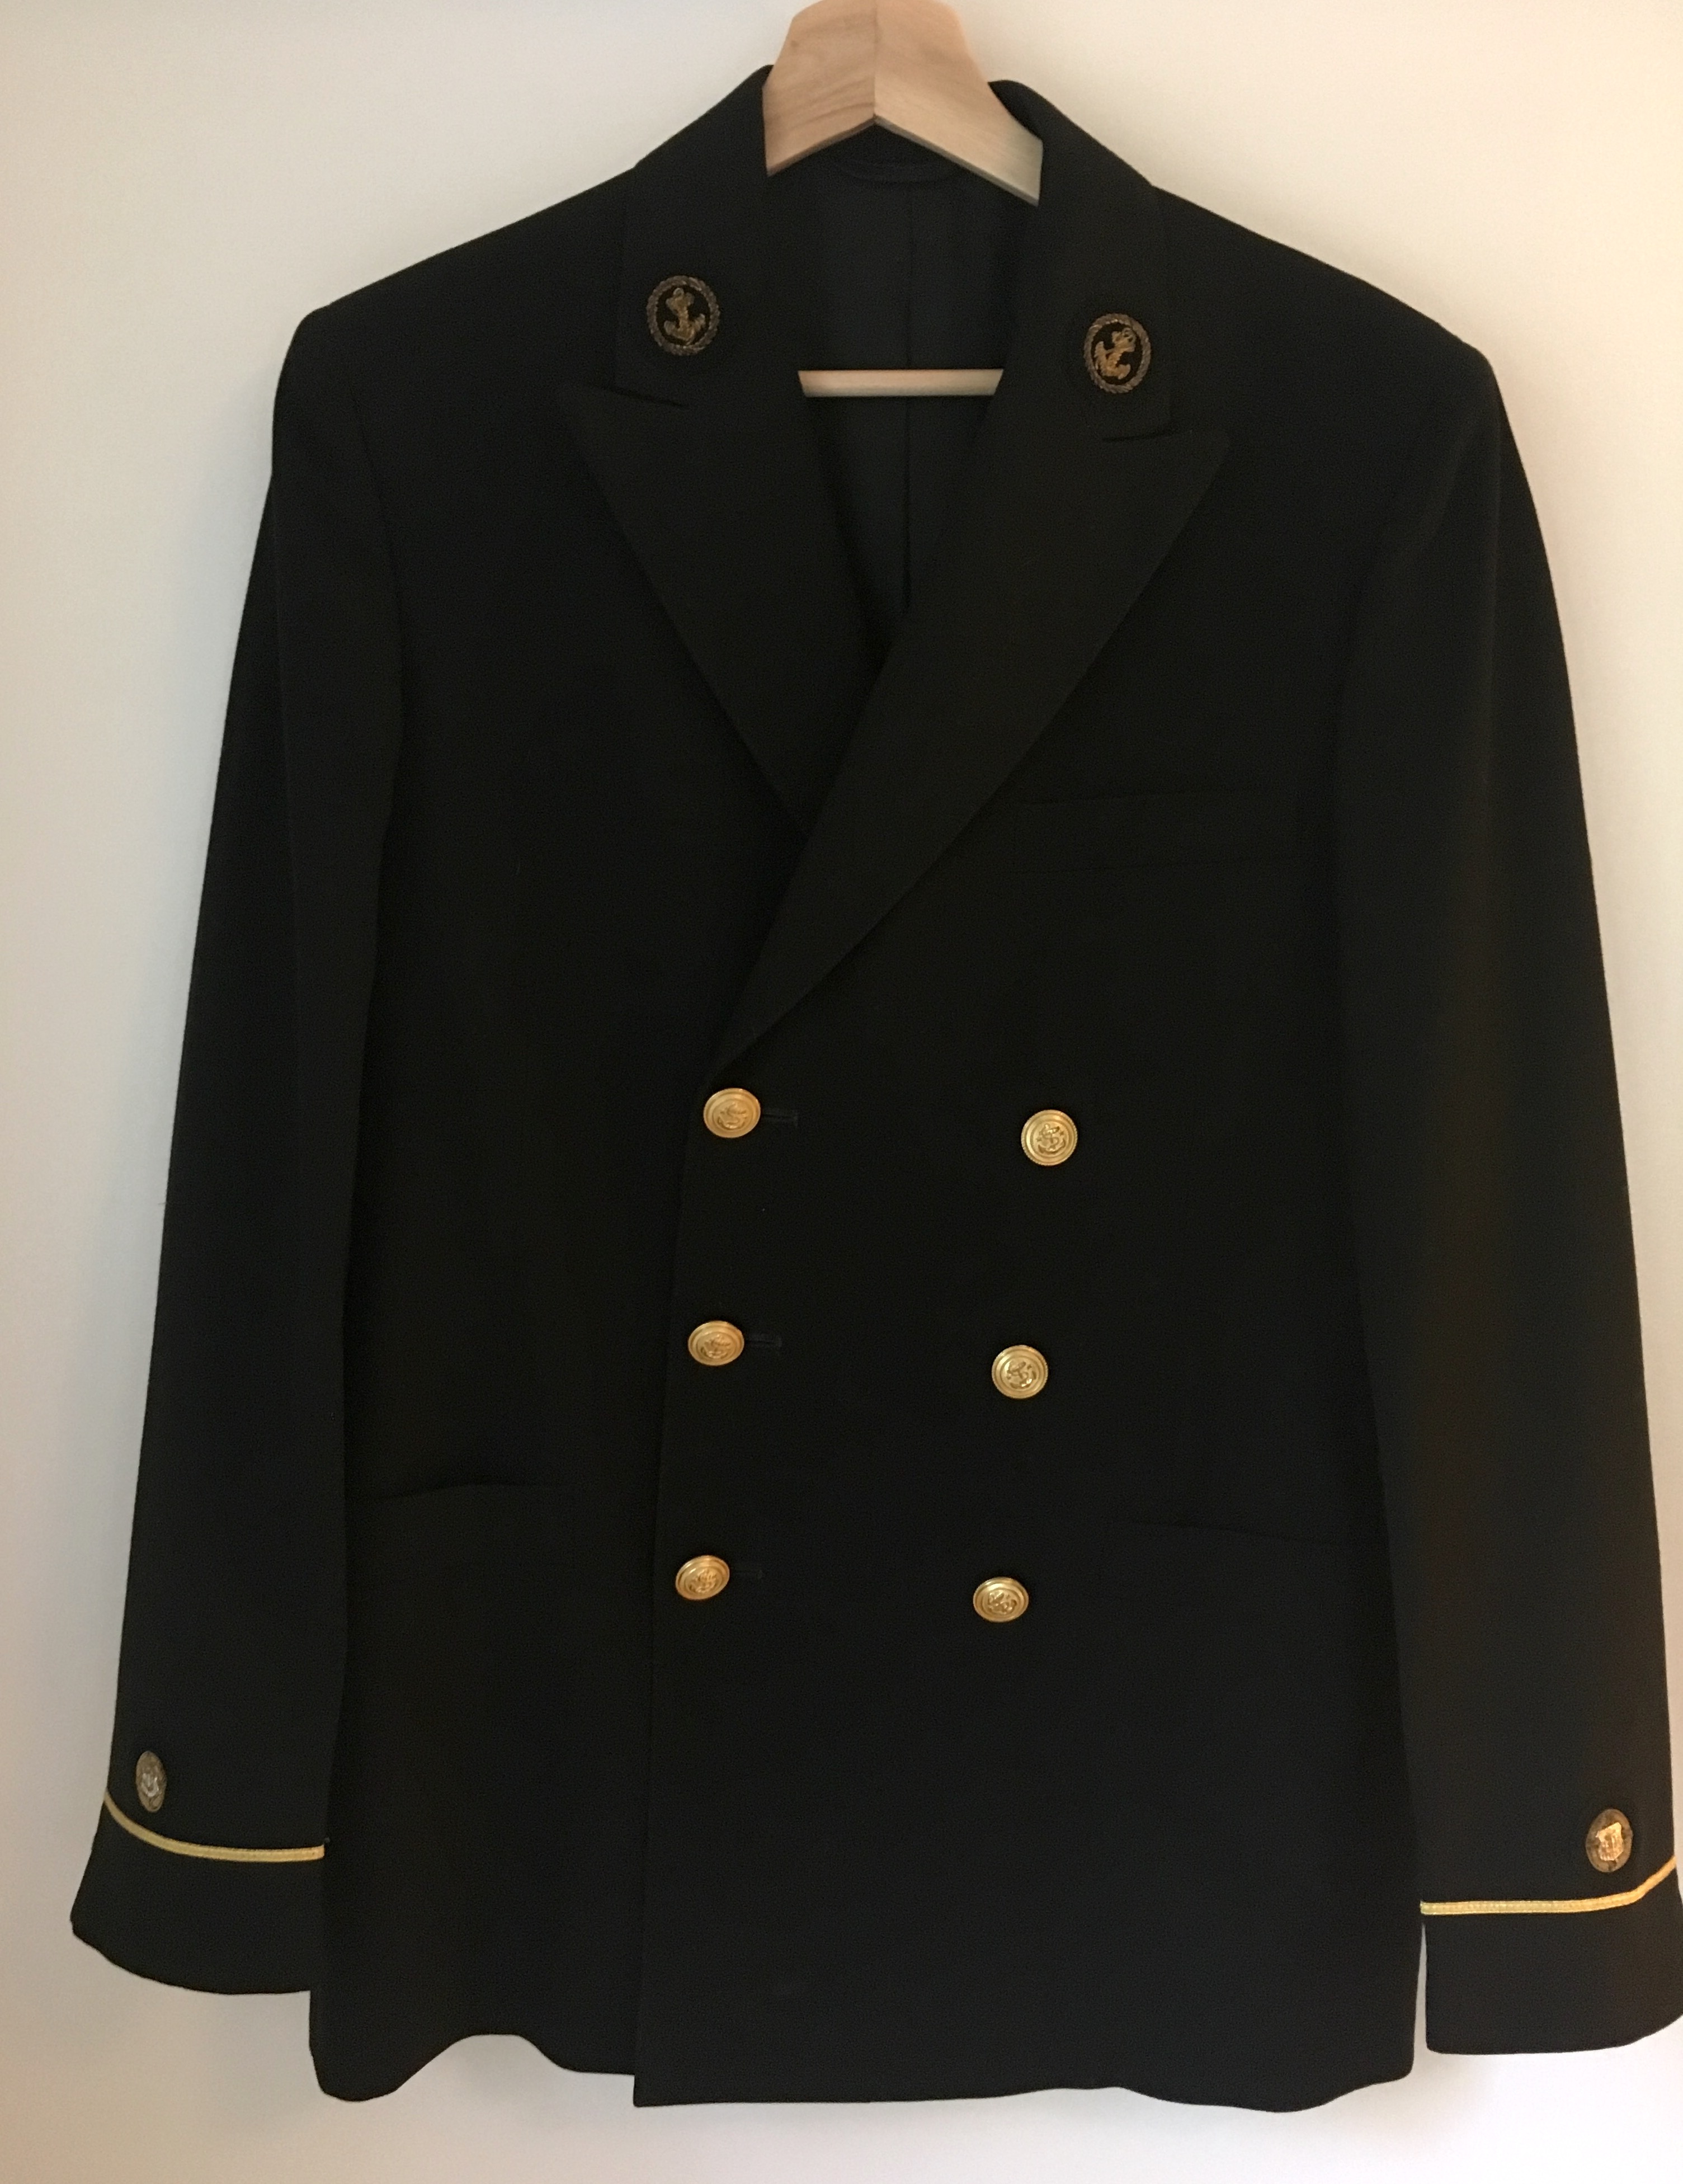 usmma uniforms: service dress blue, 1980s – a collection of writing